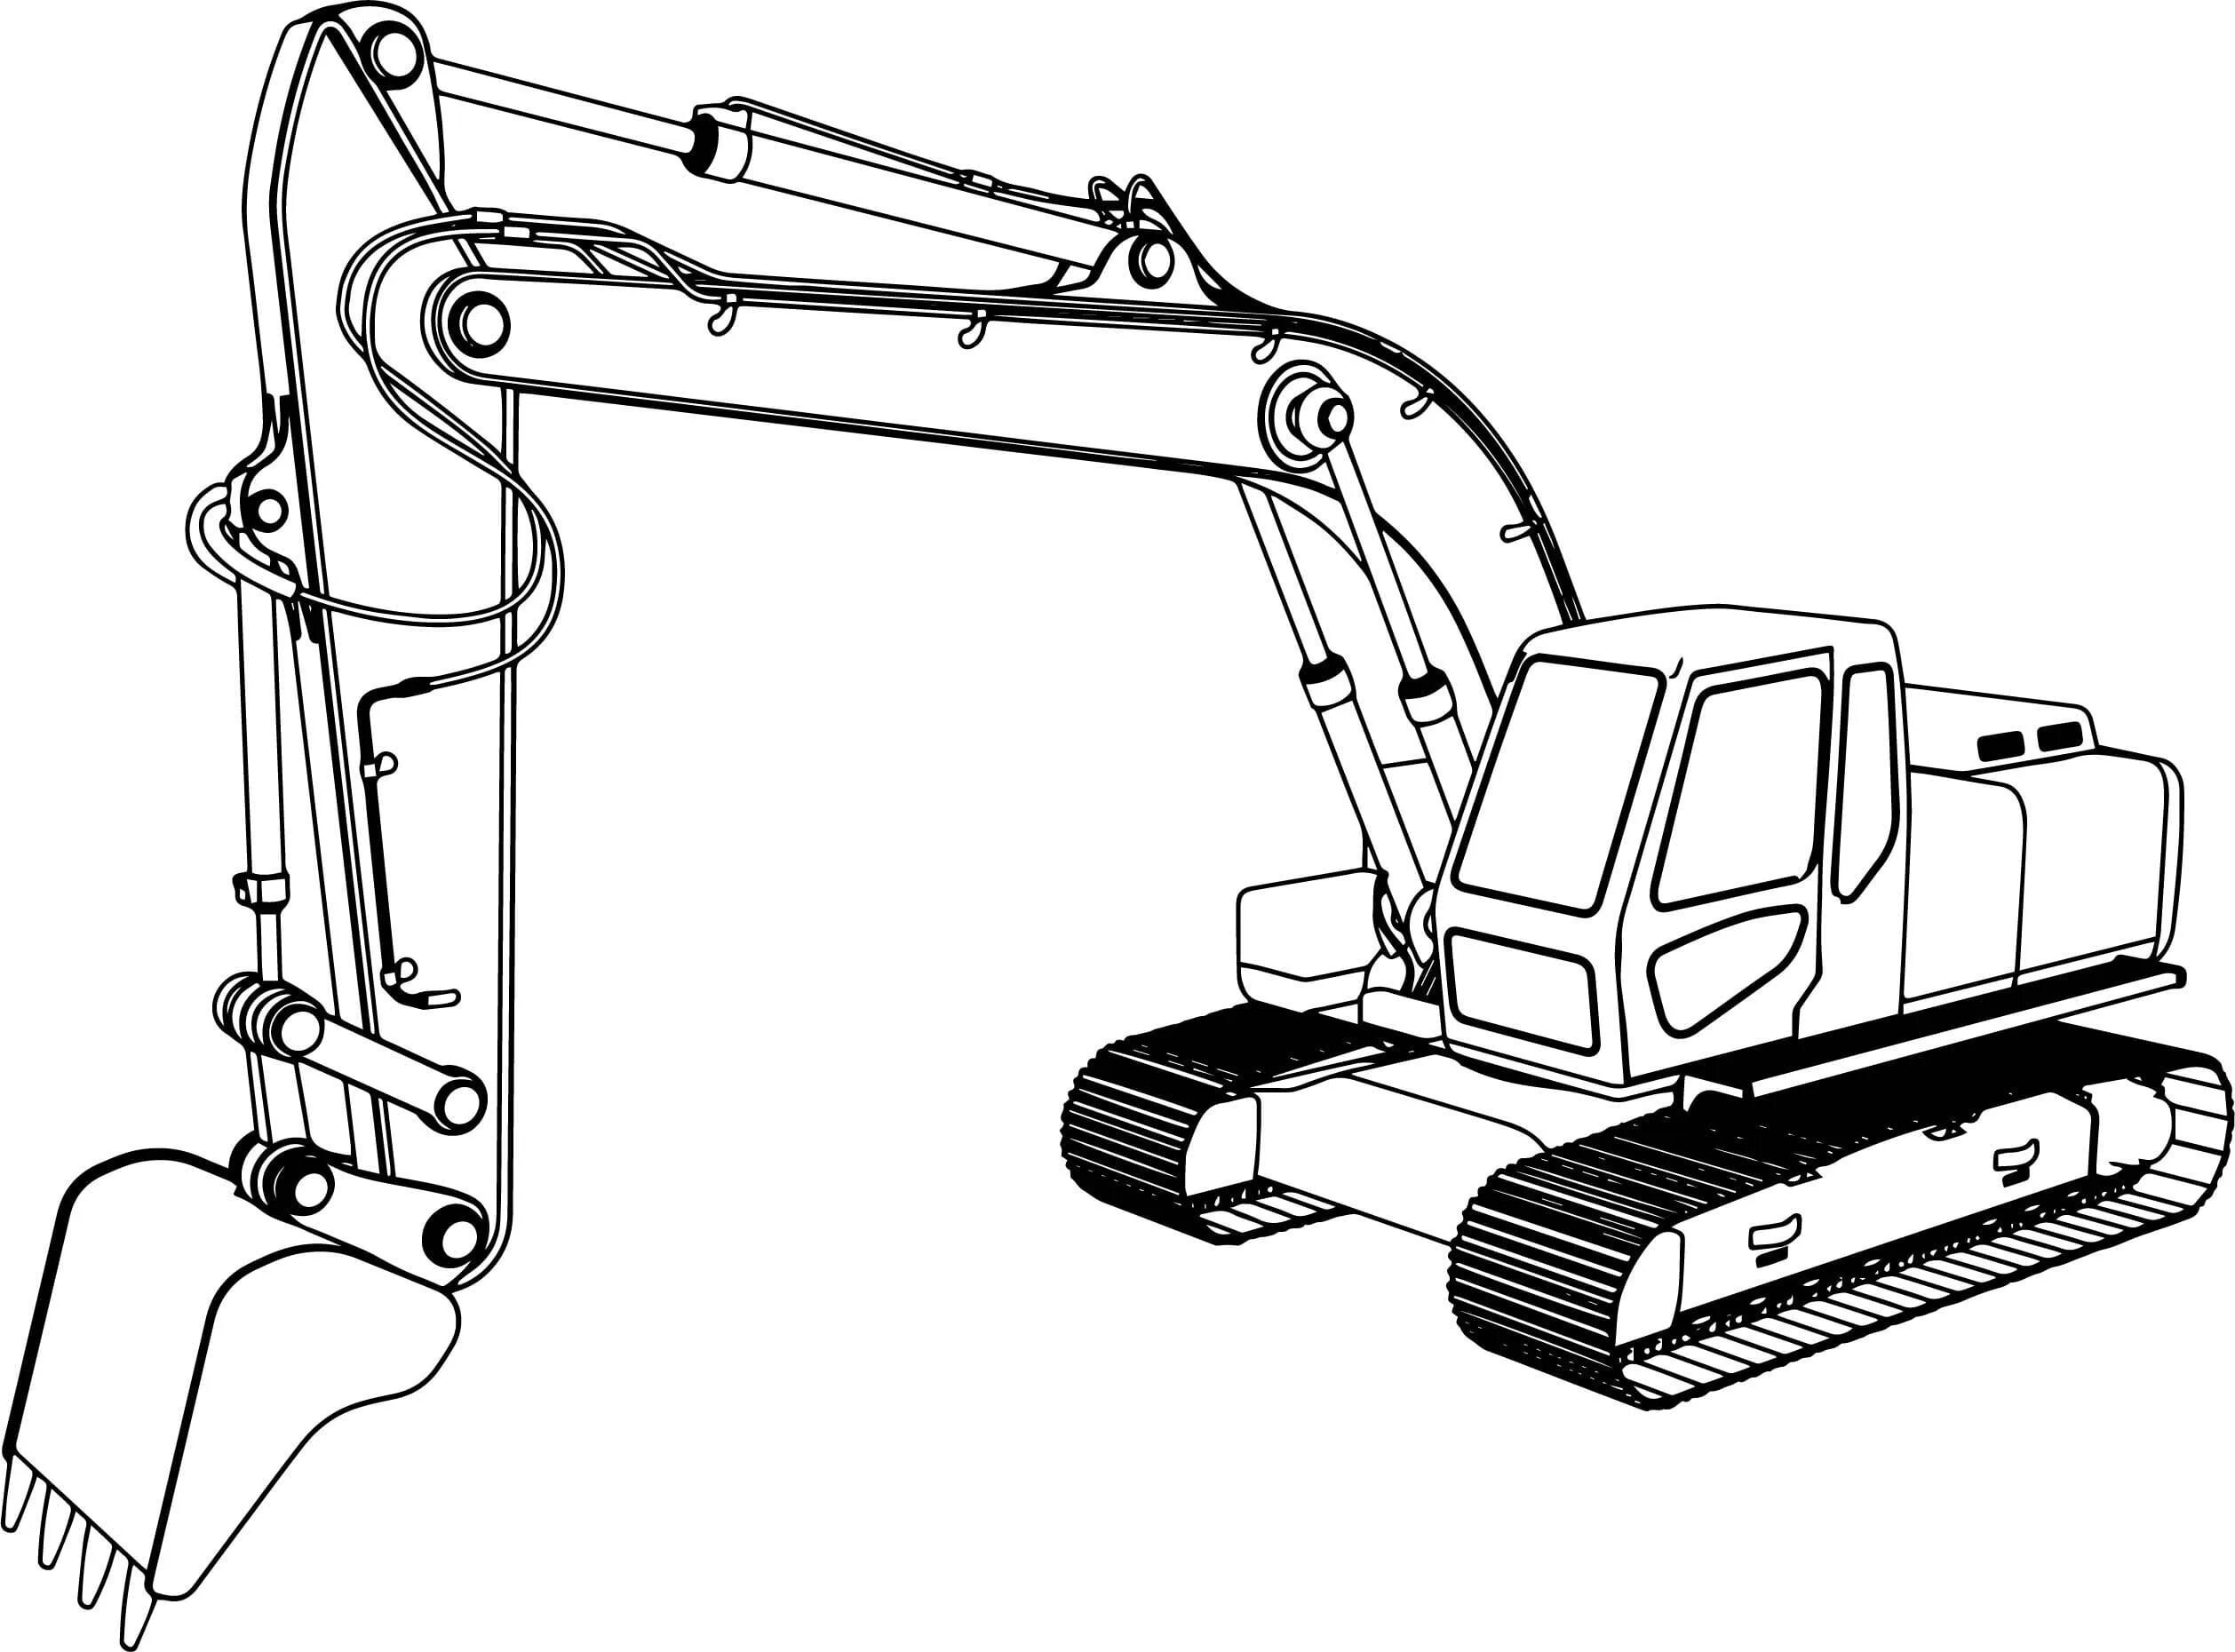 Excavator for 4 5 year olds #1